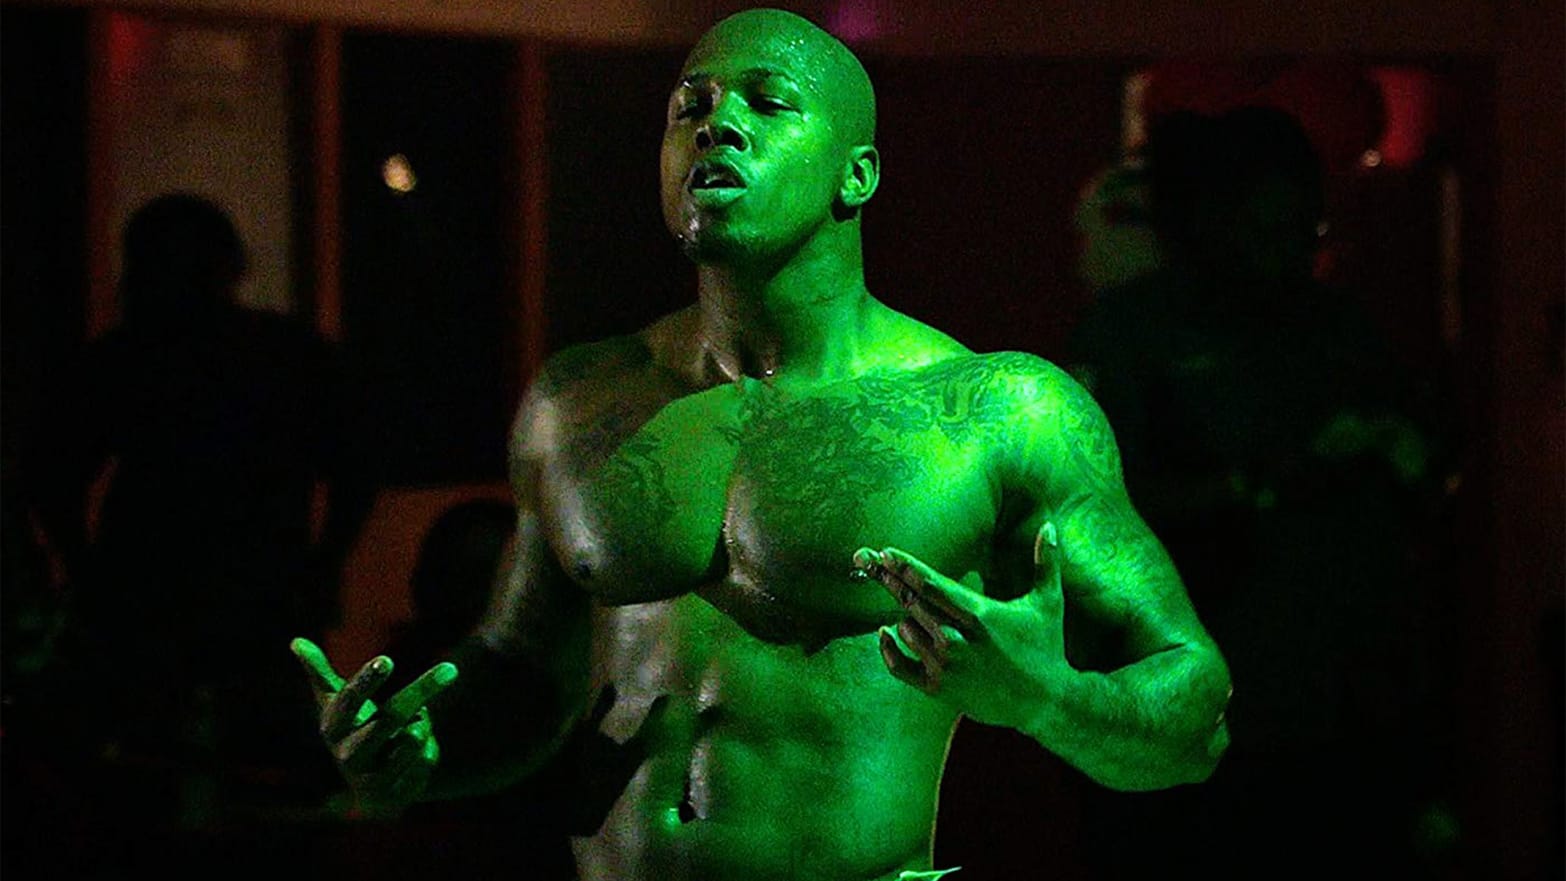 Horny Black Strippers - Meet the Black Male Strippers Putting 'Magic Mike' to Shame